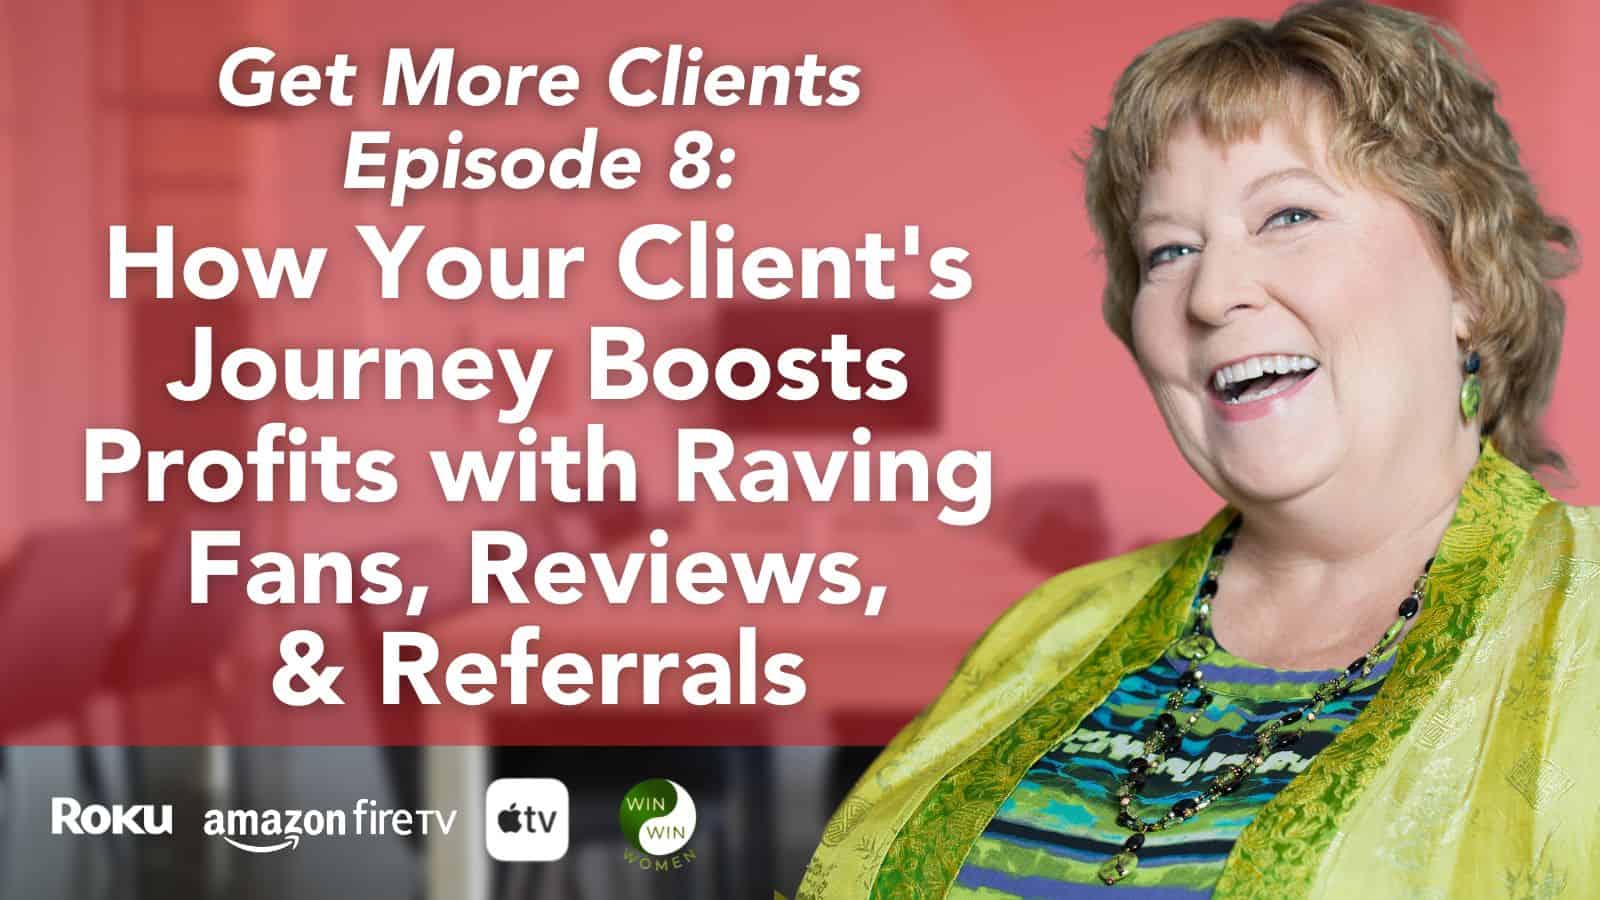 How Your Client's Journey Boosts Profits with Raving Fans, Reviews, and Referrals